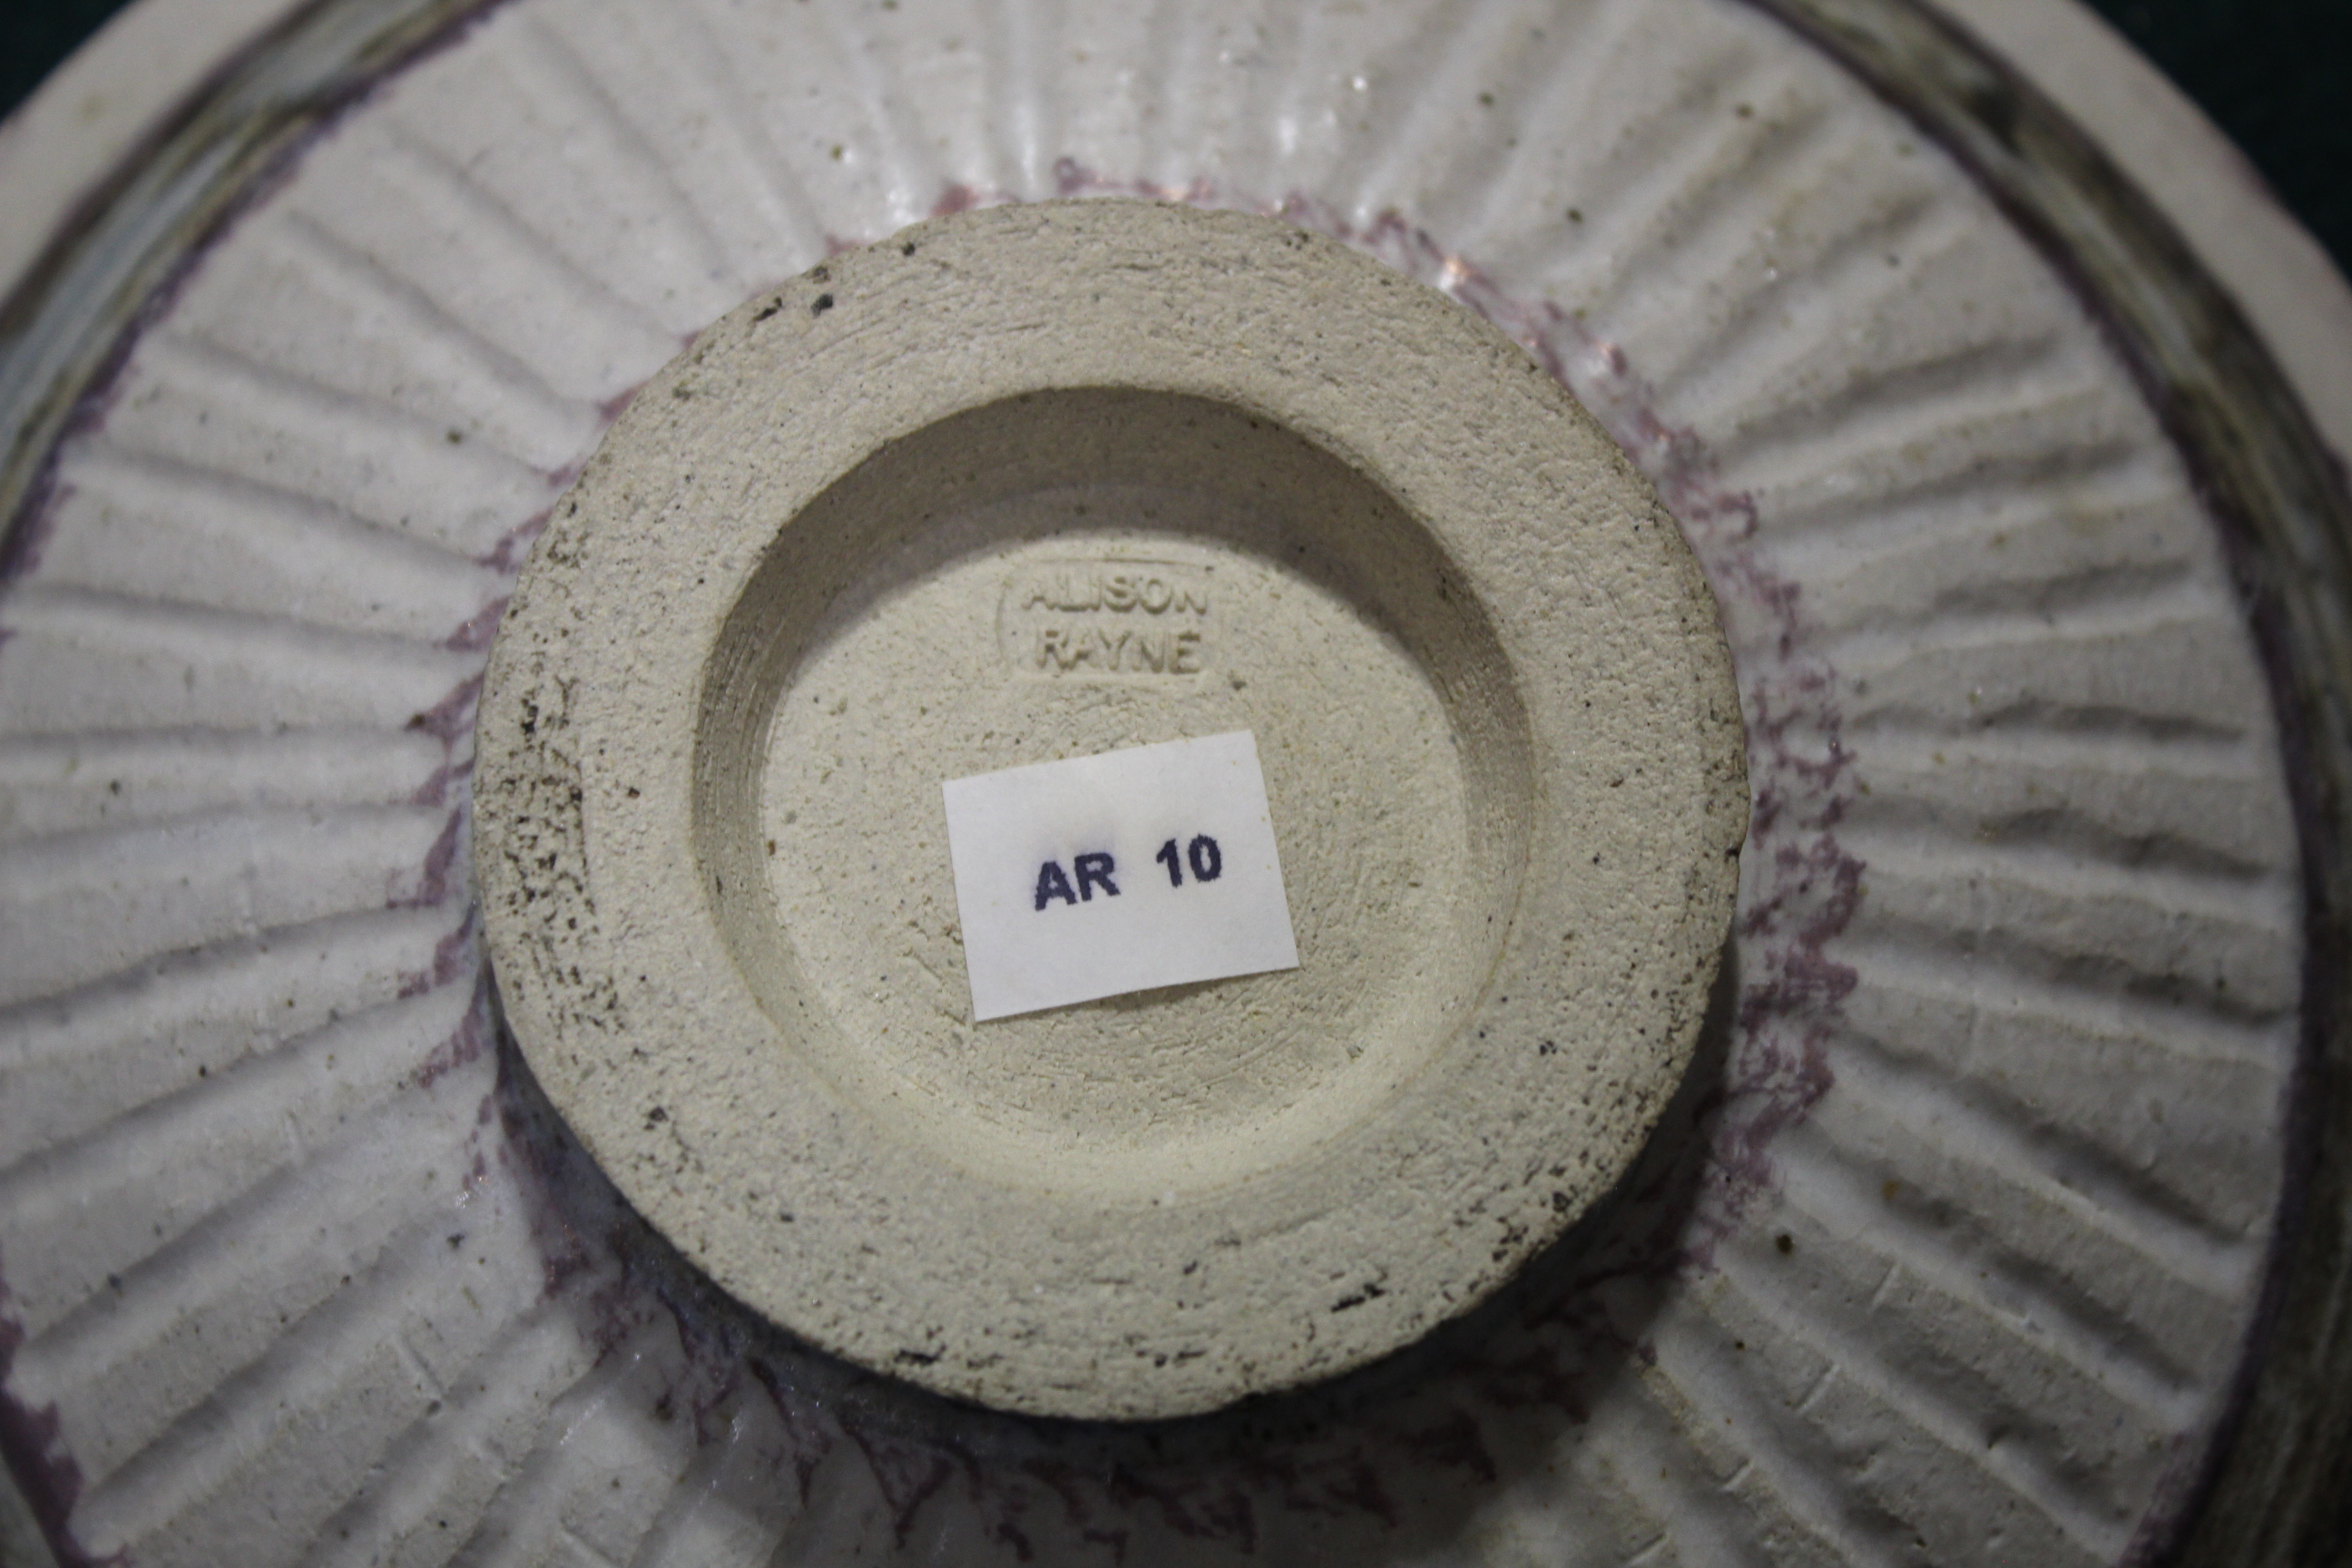 STUDIO POTTERY including a porcelain bowl by Maureen Shearlaw, with a pink and green glazed interior - Image 5 of 13